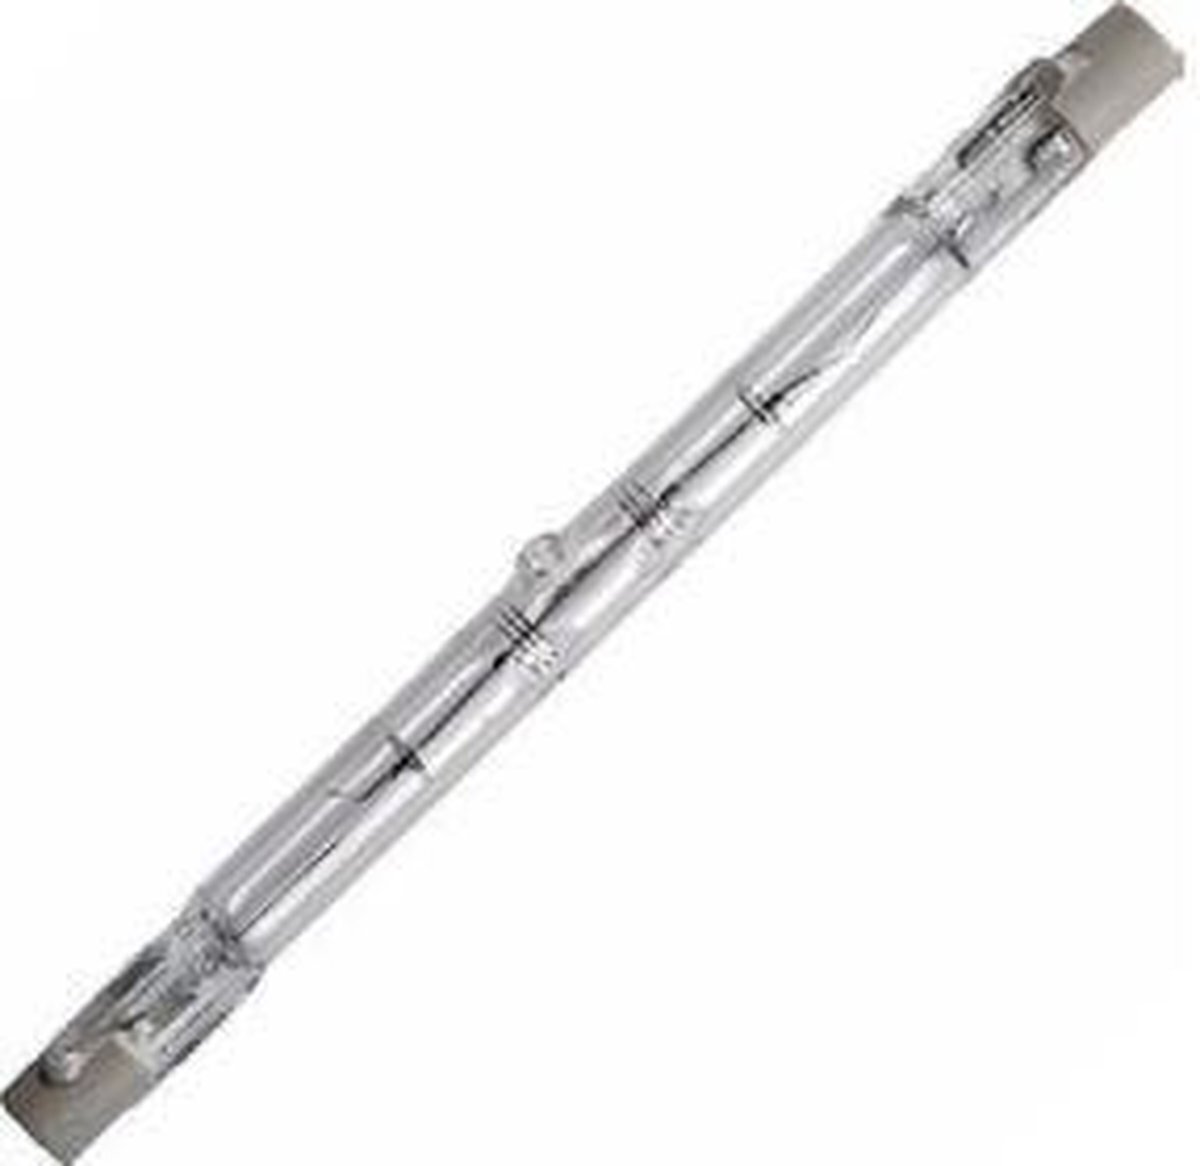 SPL Halogeen staaflamp 300W 118mm R7s 230V